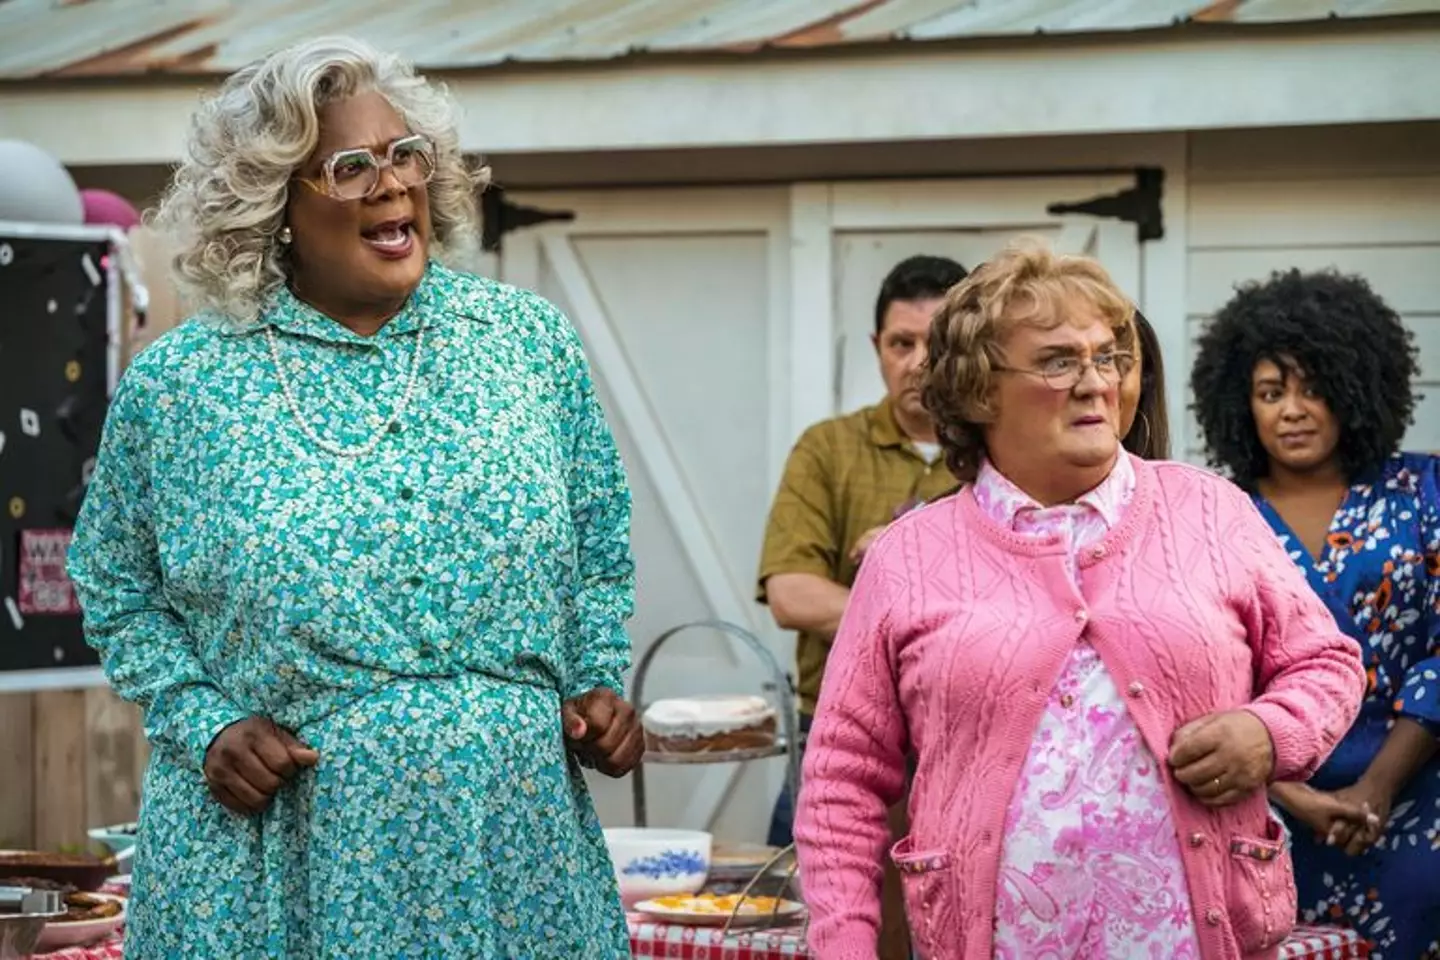 Fans were totally shocked to Brendan O'Carroll appearing as the Mrs Brown in the movie (